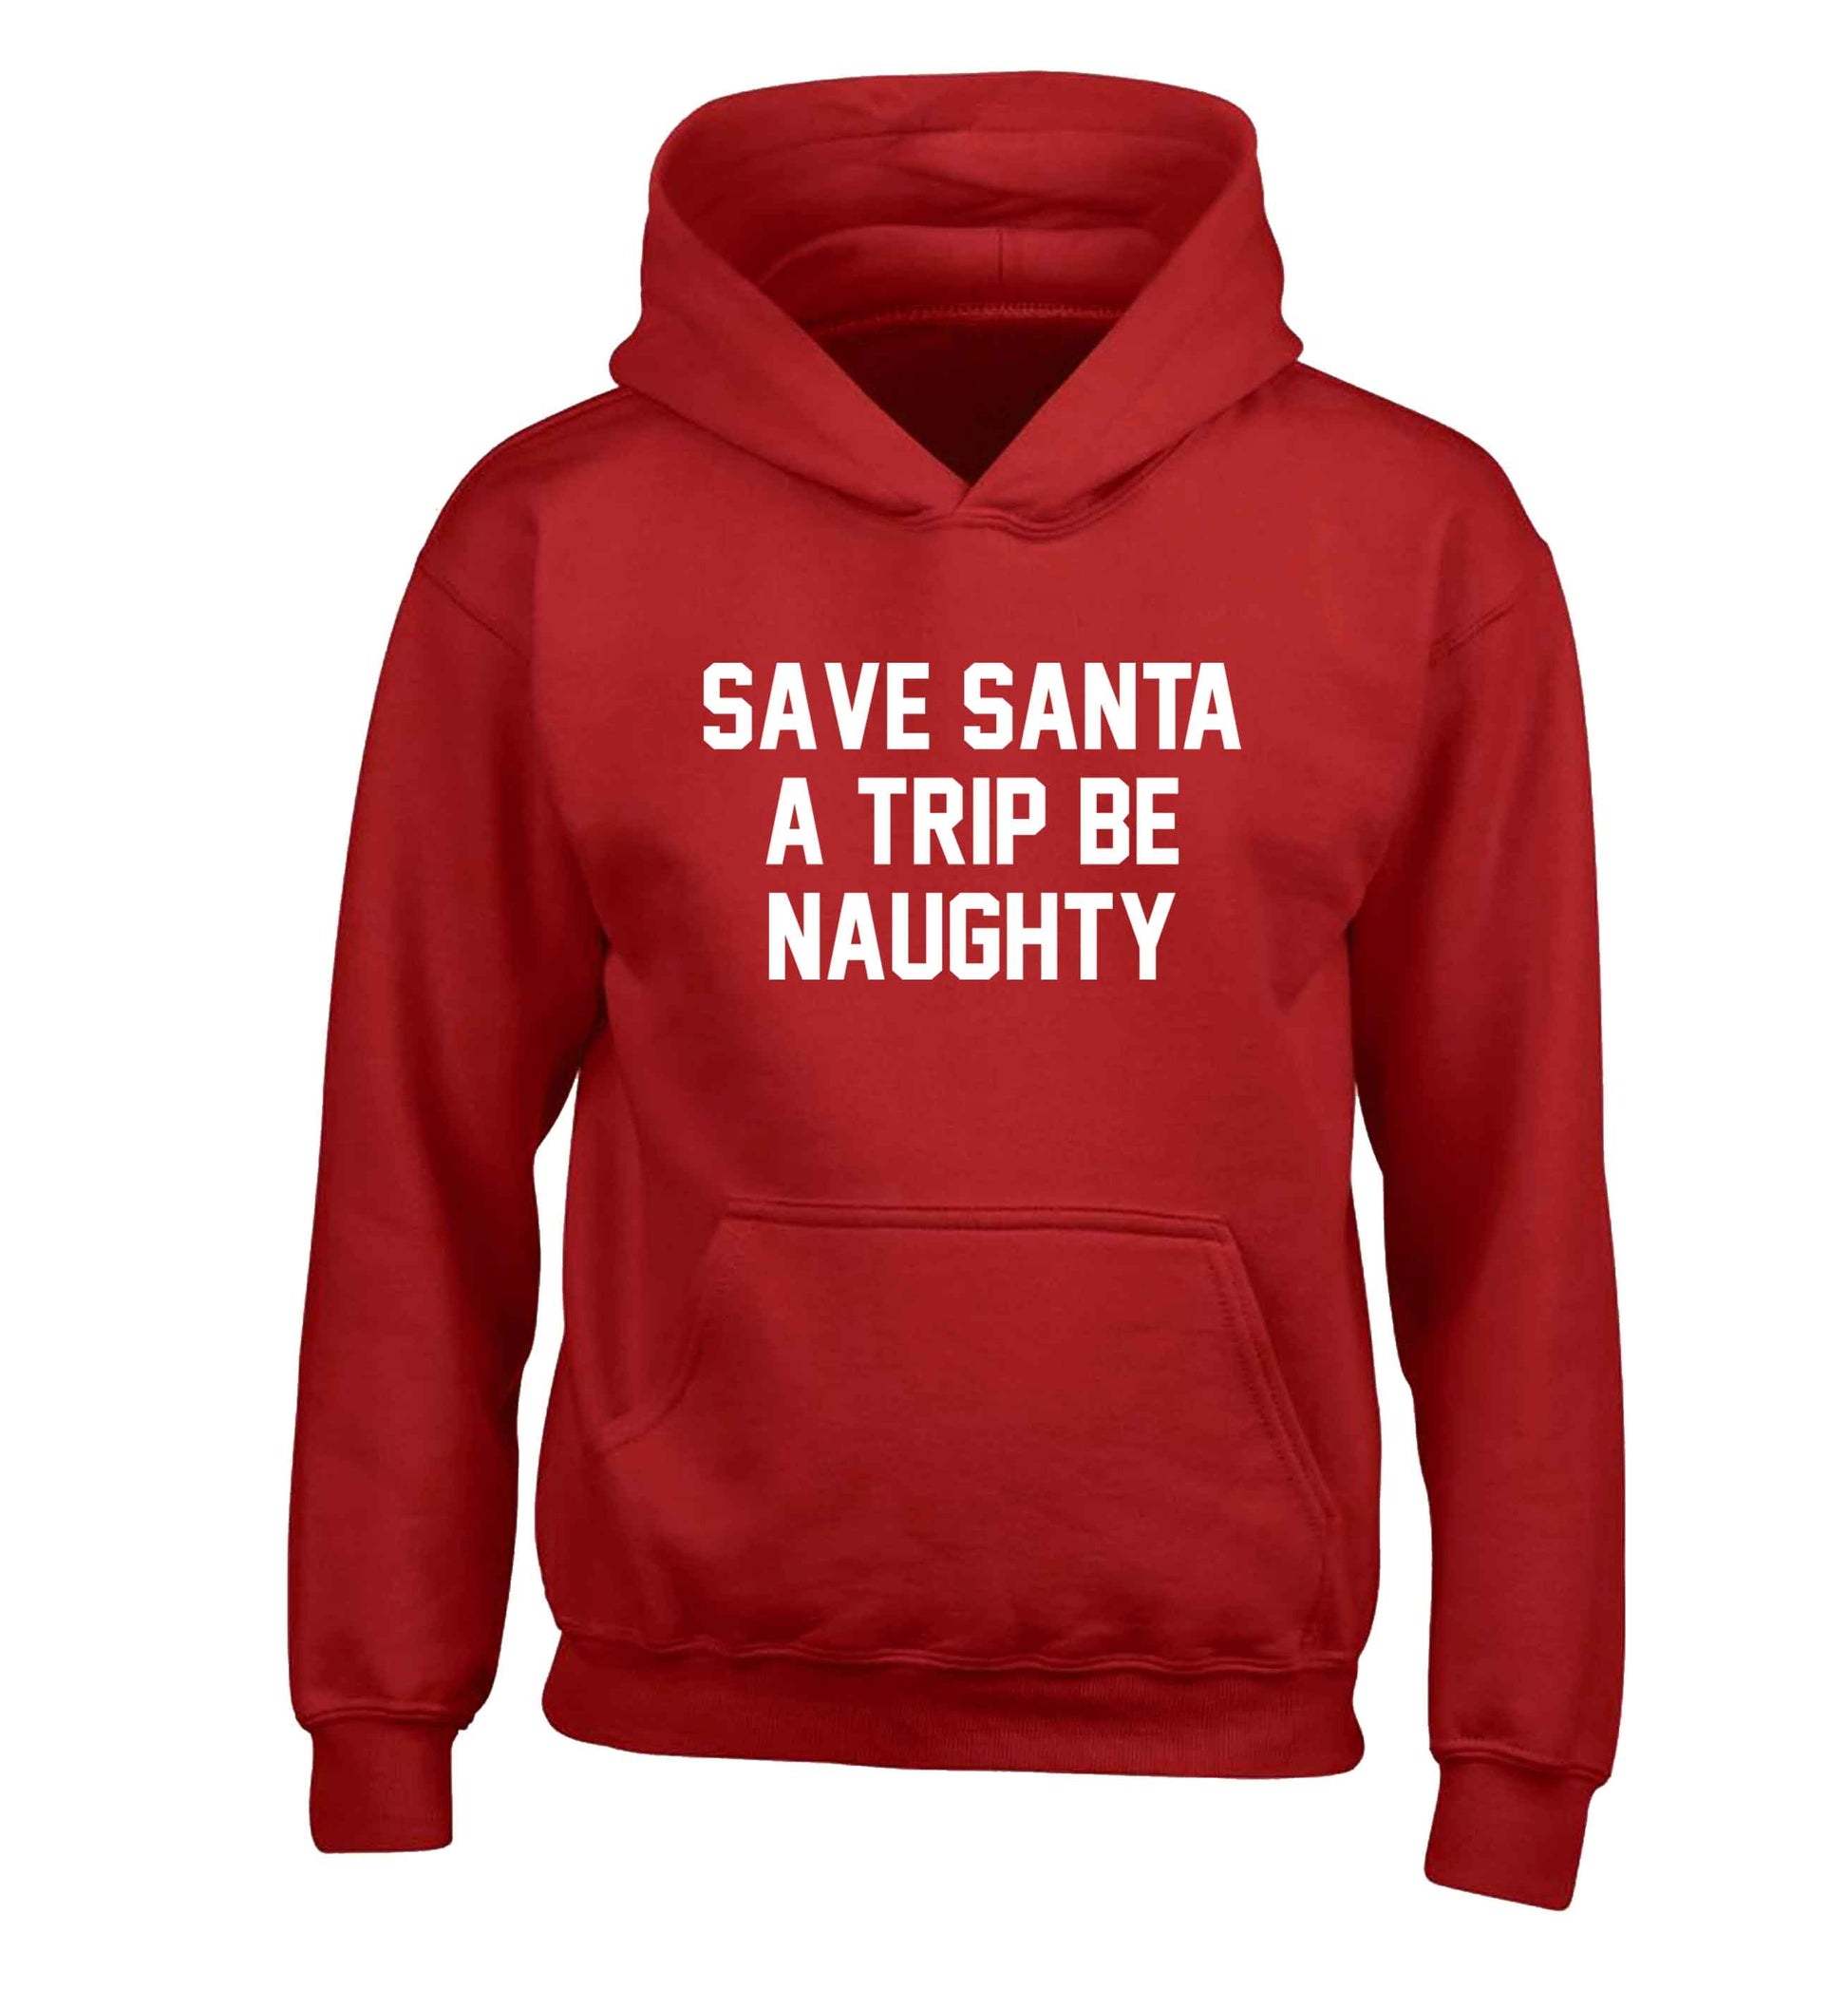 Save Santa a trip be naughty children's red hoodie 12-13 Years